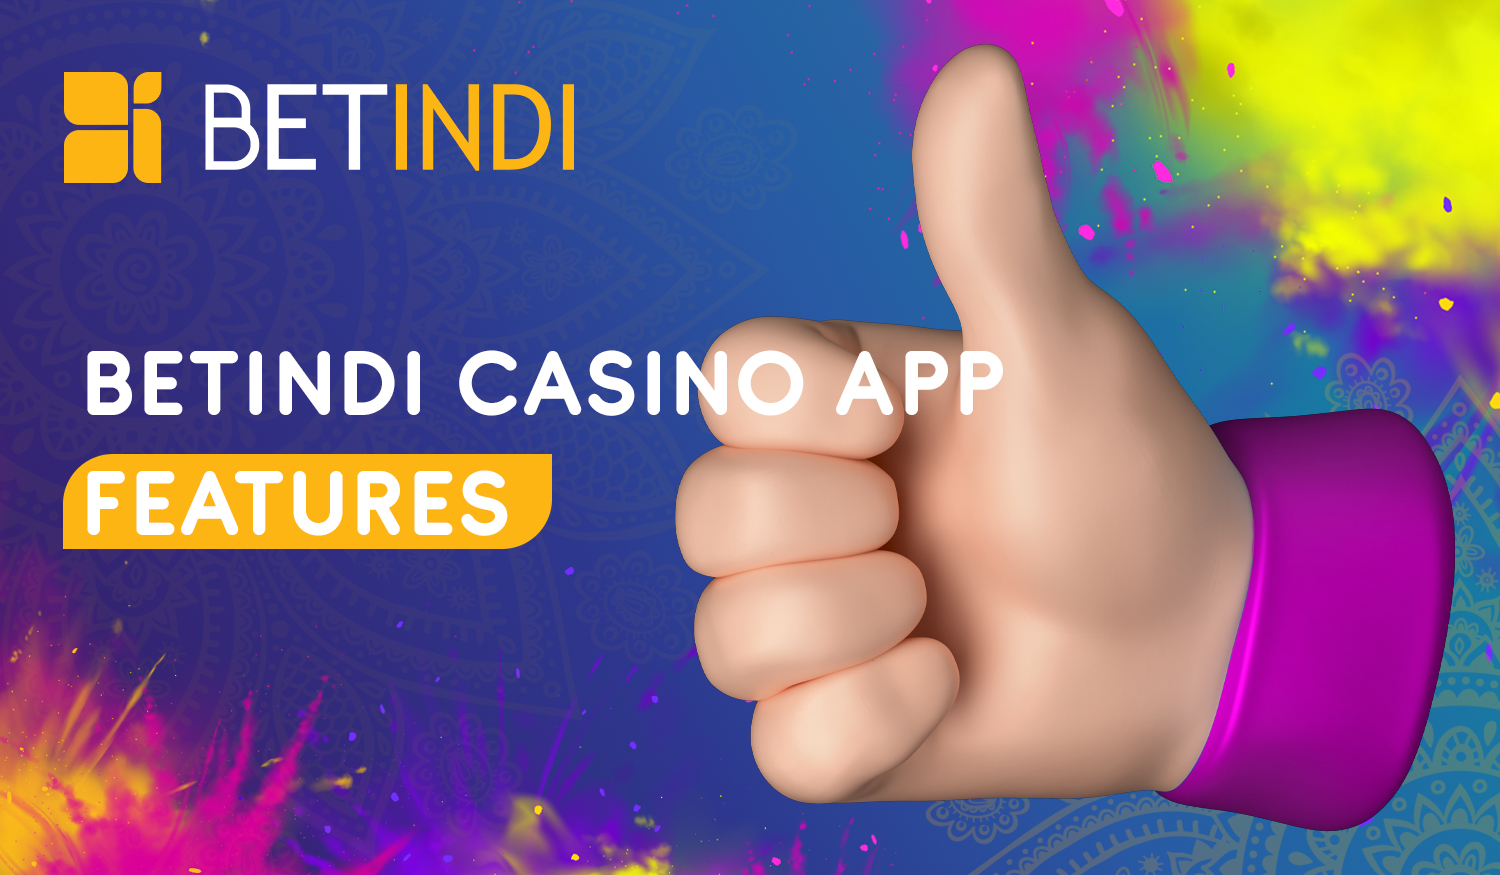 What makes the Betindi app different from others on the sports betting market